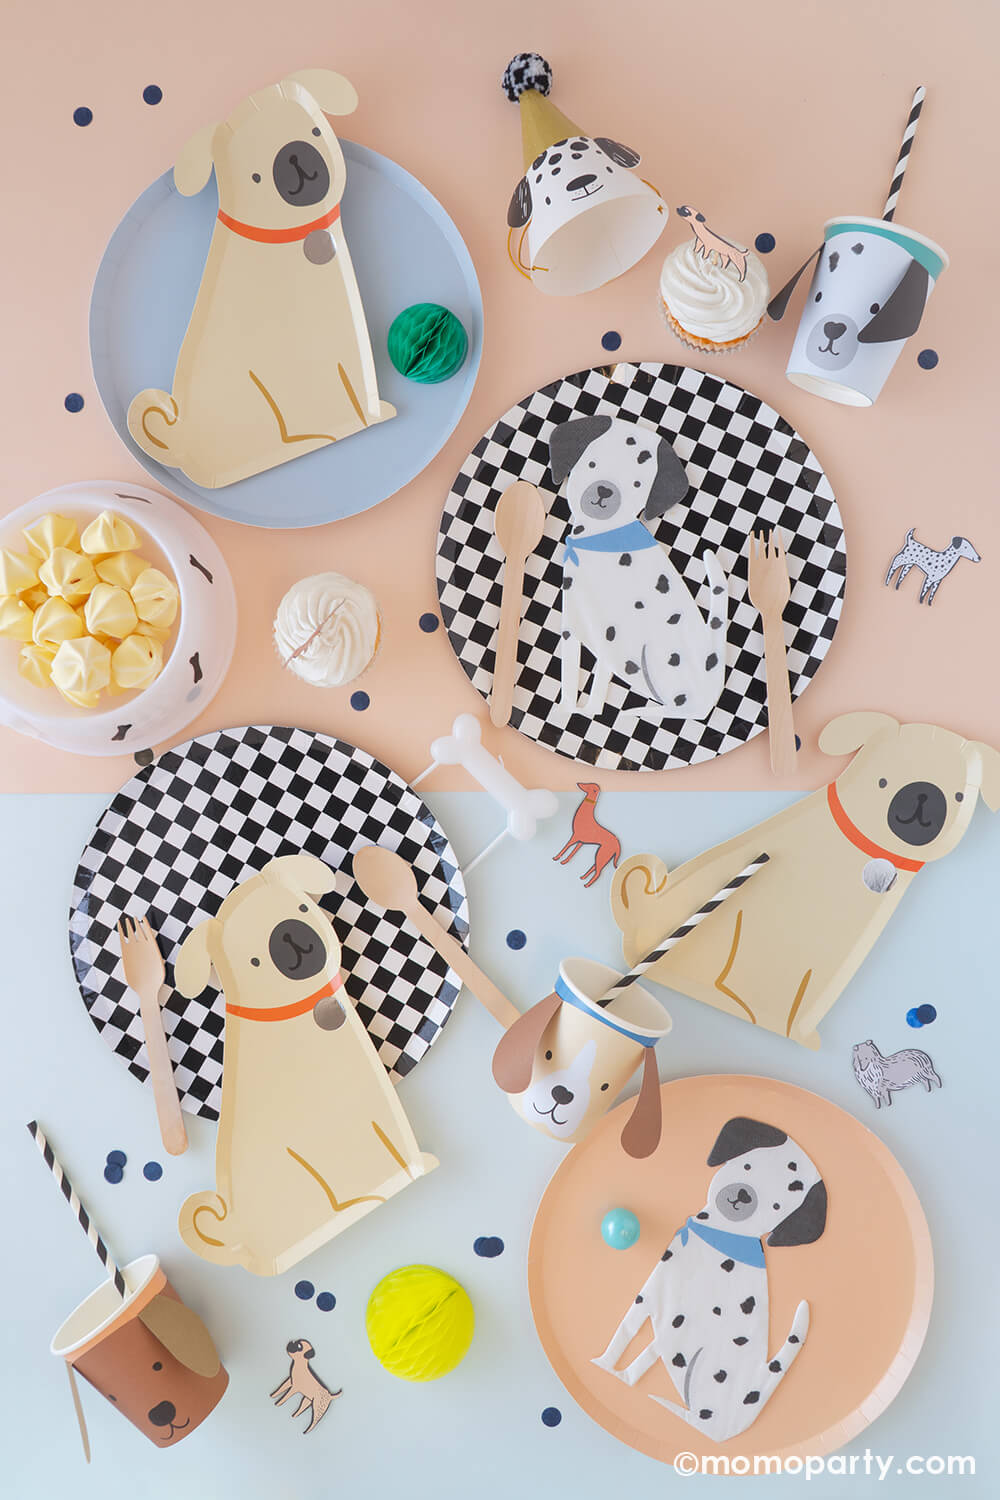 Bluey Birthday Party Supplies and Bluey Birthday Decorations - 16 Dessert  Plates and 16 Lunch Plates, 16 Napkins, 1 Table Cover, and 1 Sticker Sheet  